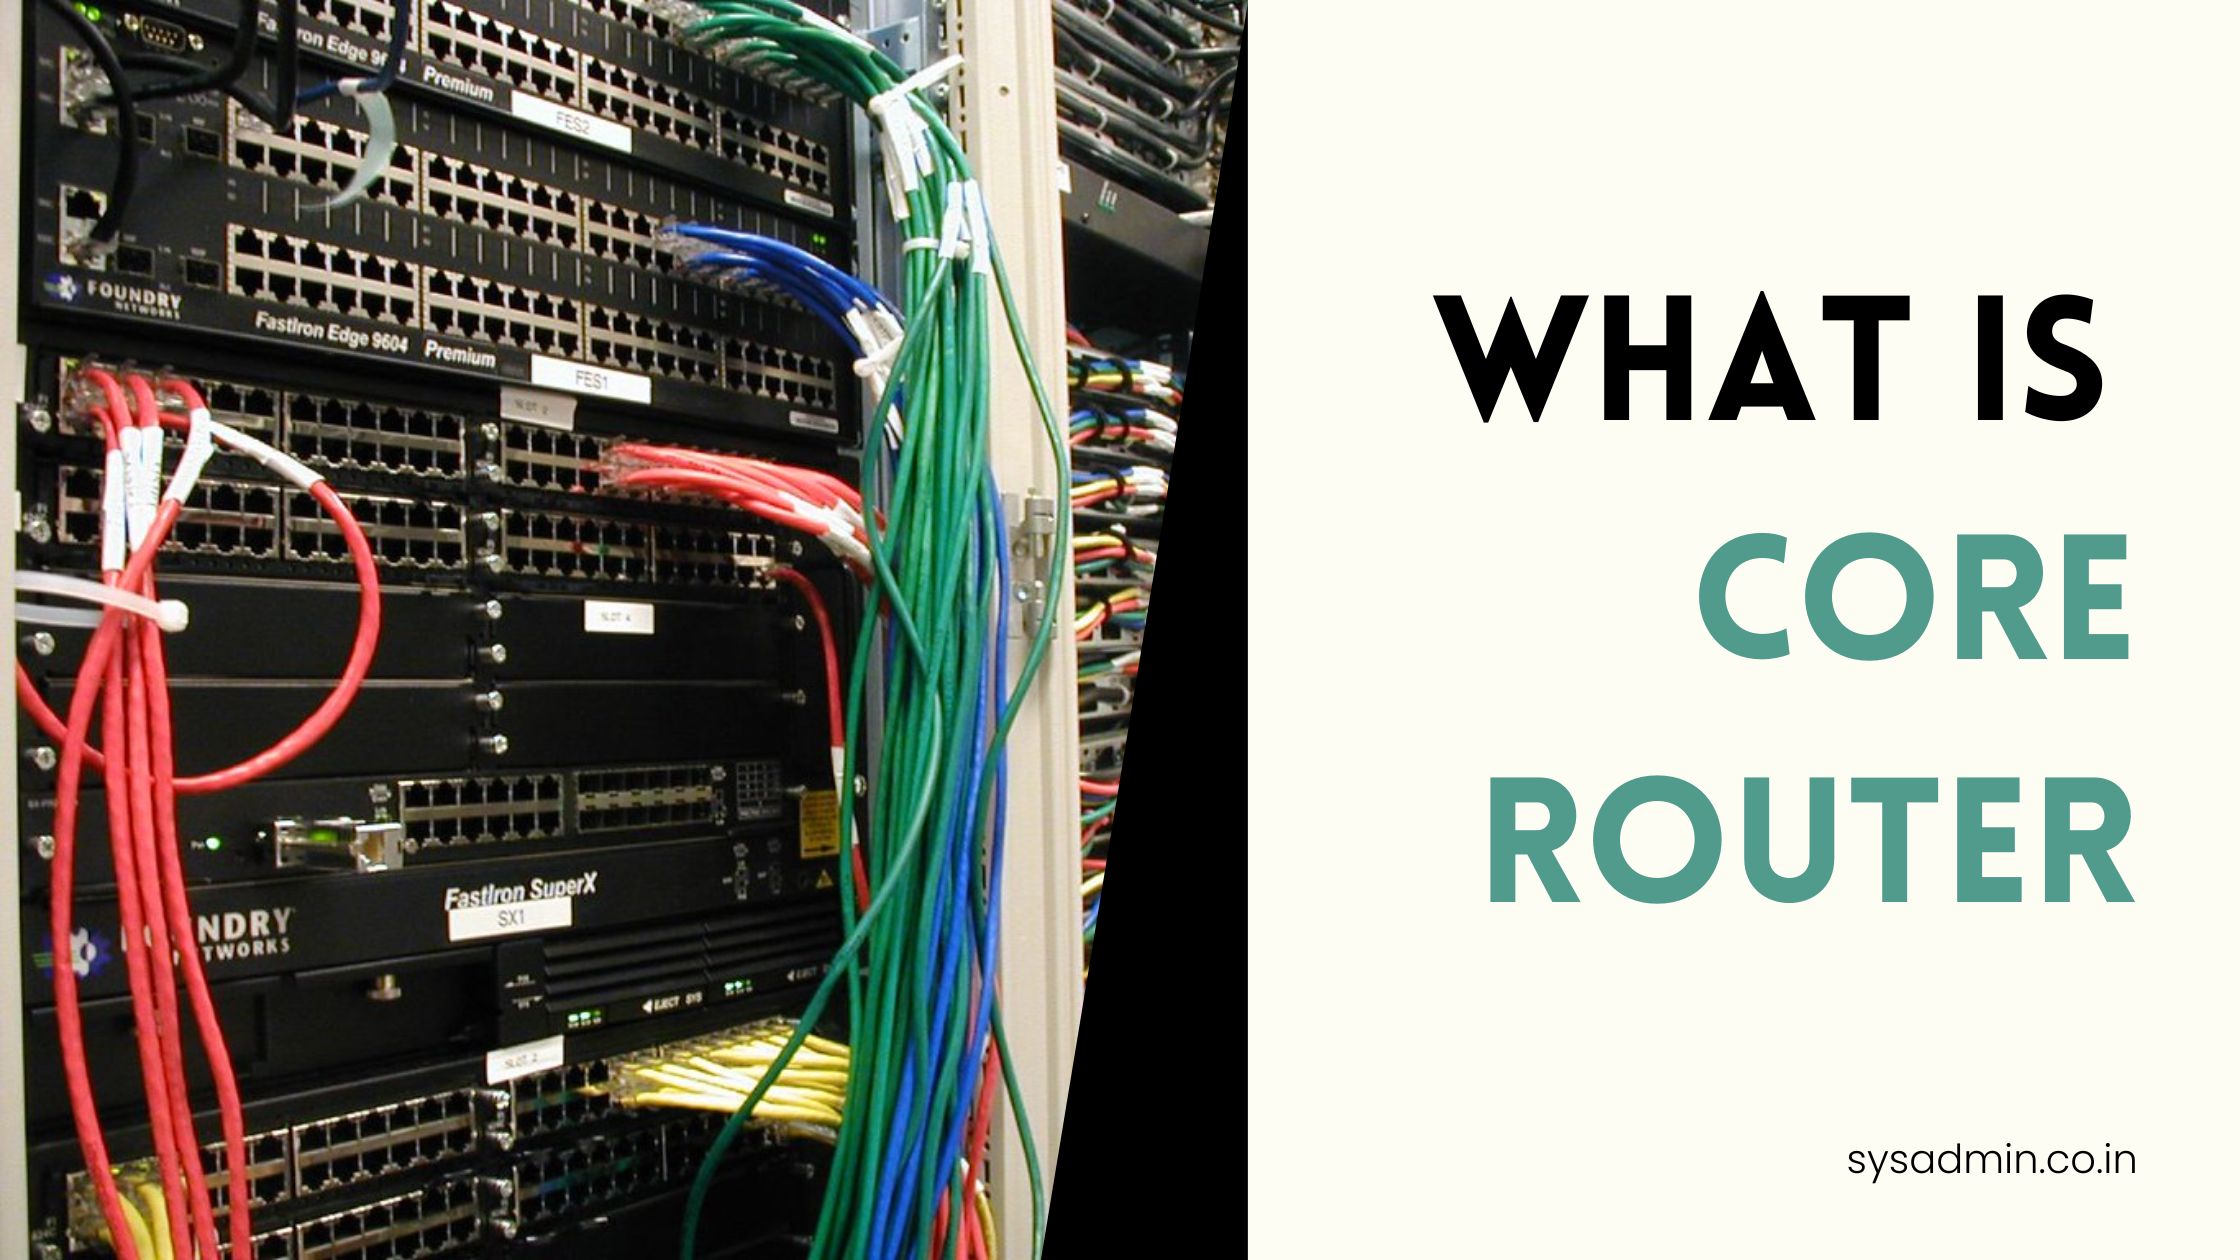 What is core router